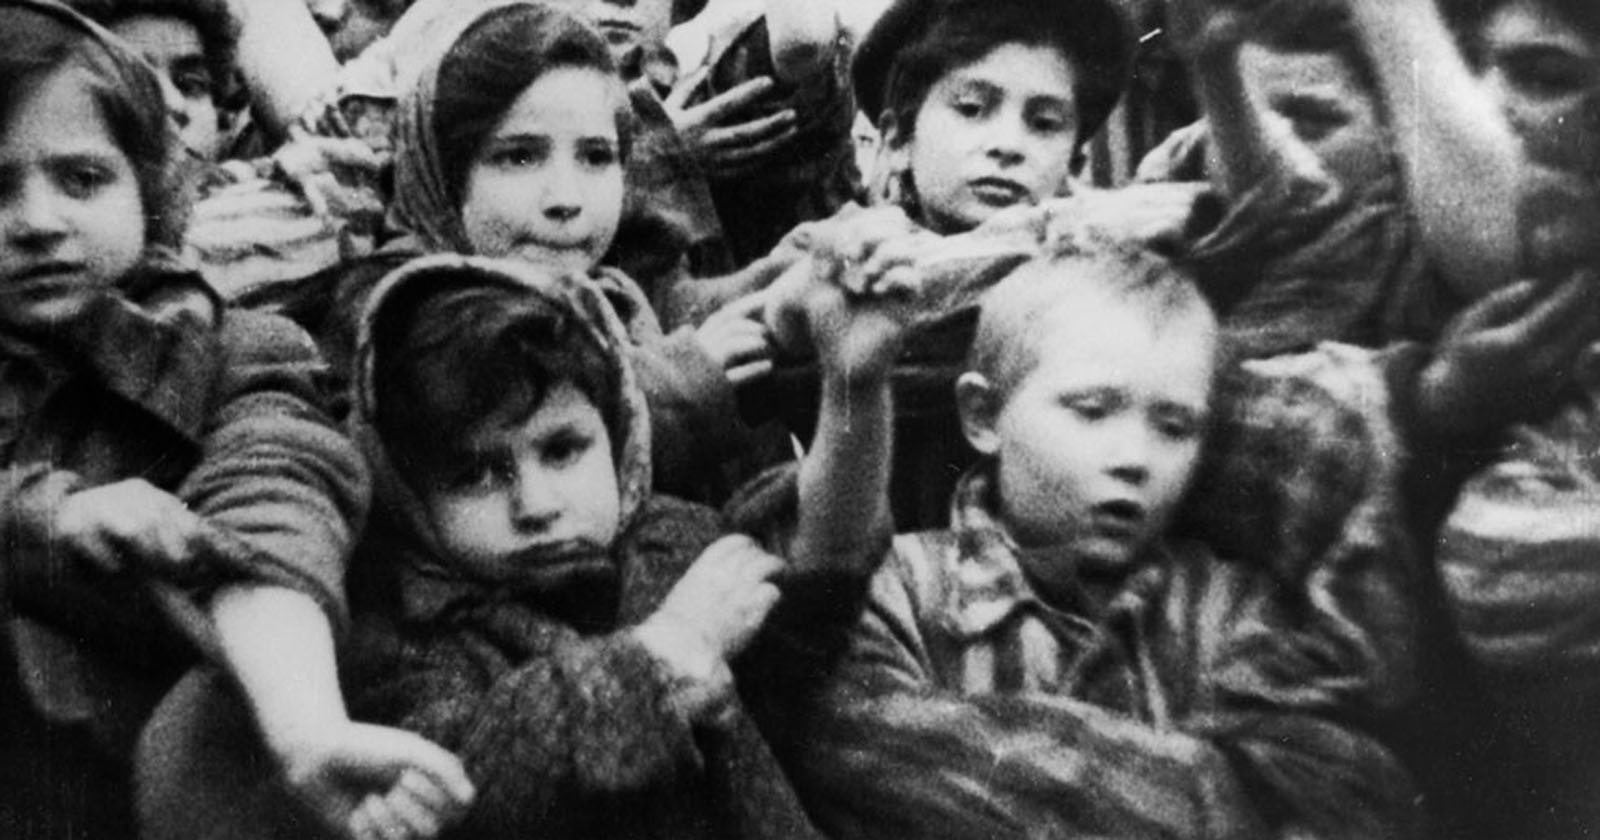 Engineer Creates AI That Identifies Photos of Unknown Holocaust Victims